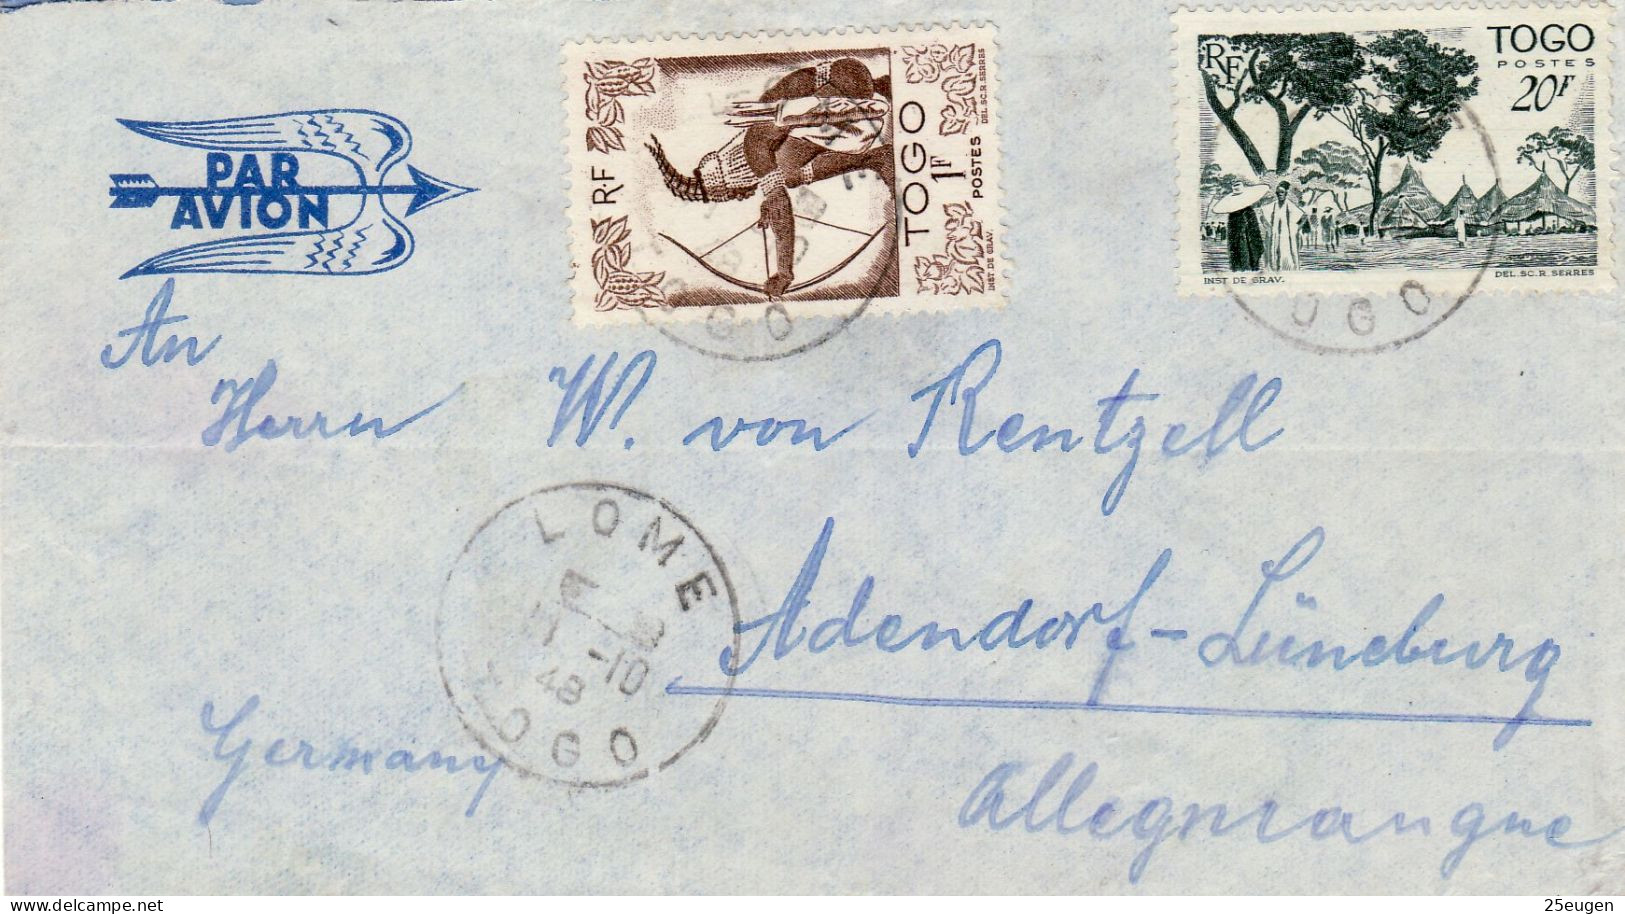 TOGO 1948  AIRMAIL  LETTER SENT FROM LOME TO ADENDORF - Briefe U. Dokumente